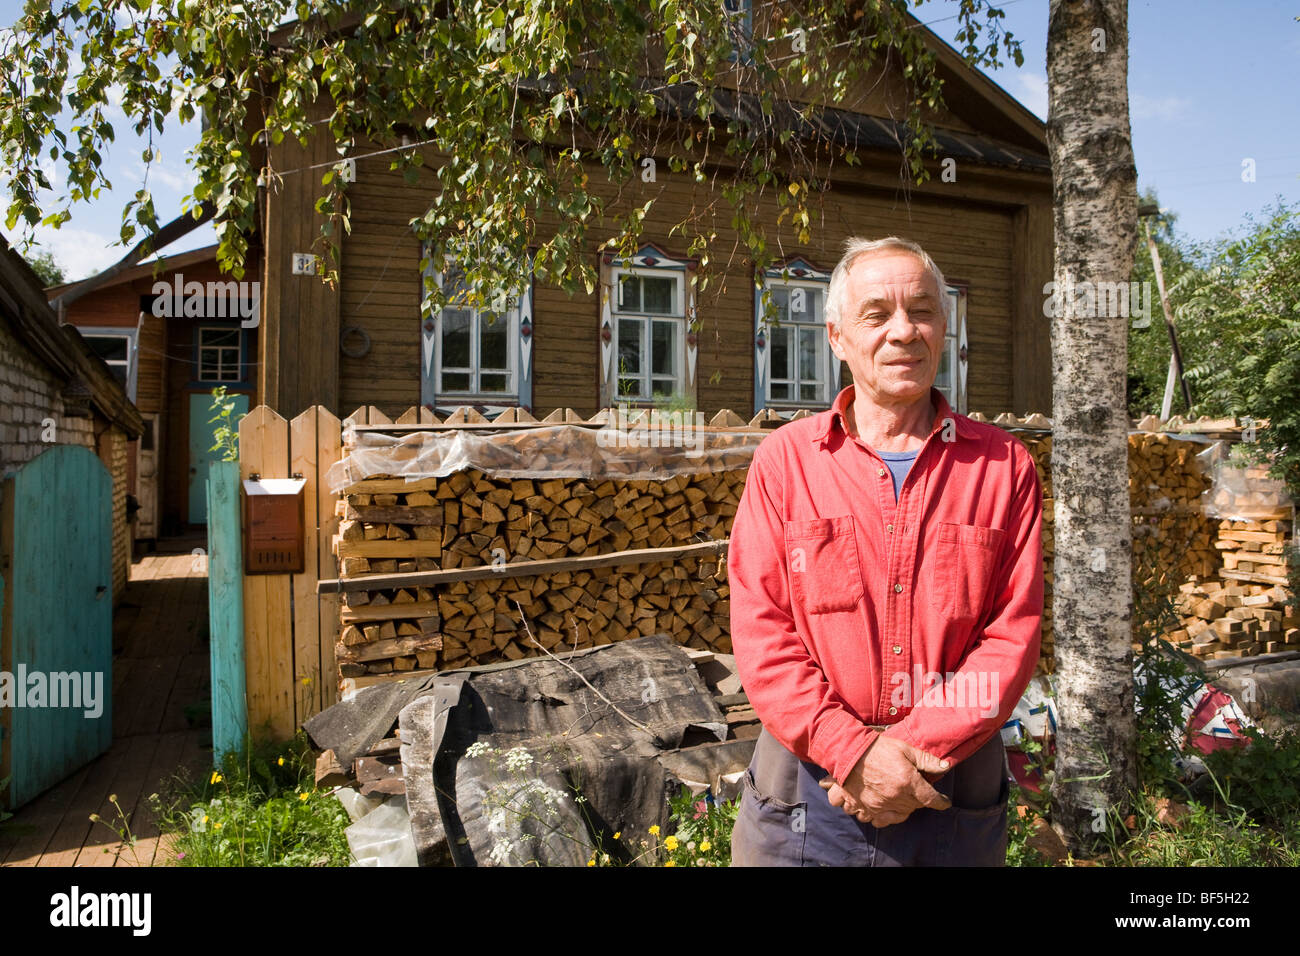 Man in dacha (second home) garden with stacked logs, portrait, Kirov, Kirov Oblast, Russia Stock Photo